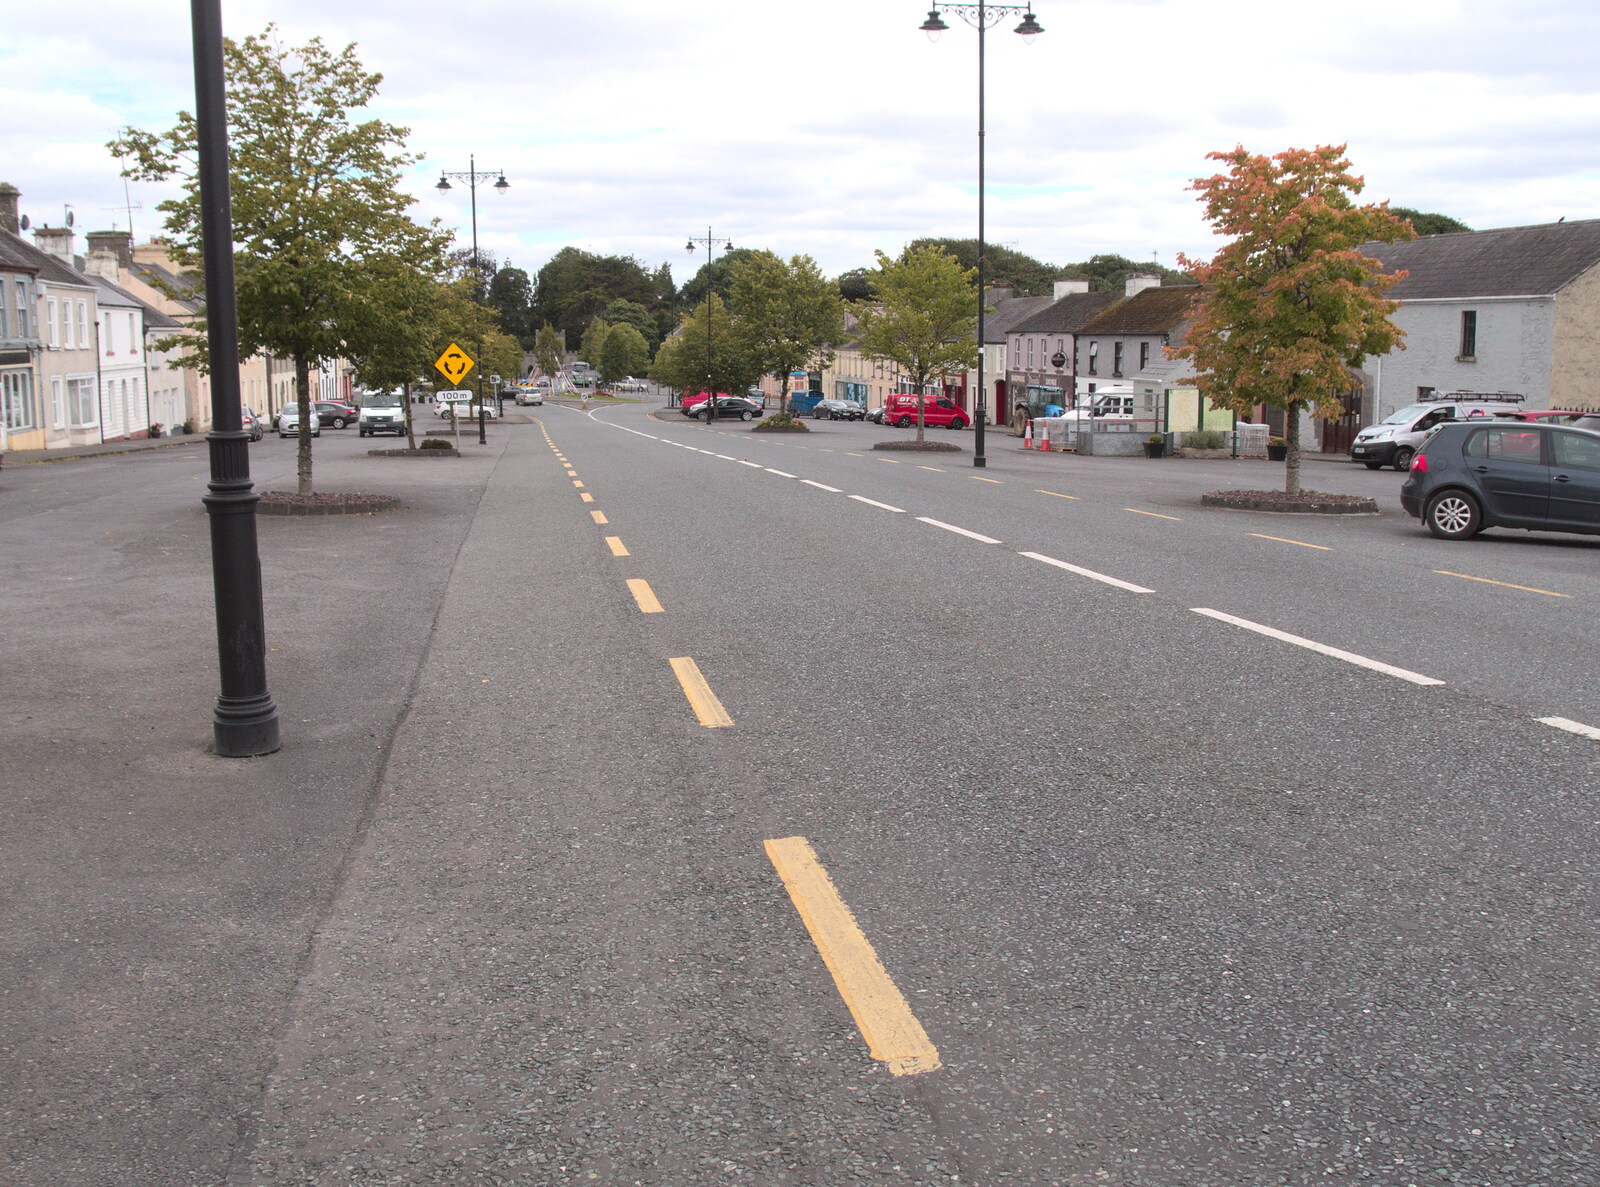 Church Street - the second-widest in Ireland from From Achill to Strokestown, Mayo and Roscommon, Ireland - 10th August 2017